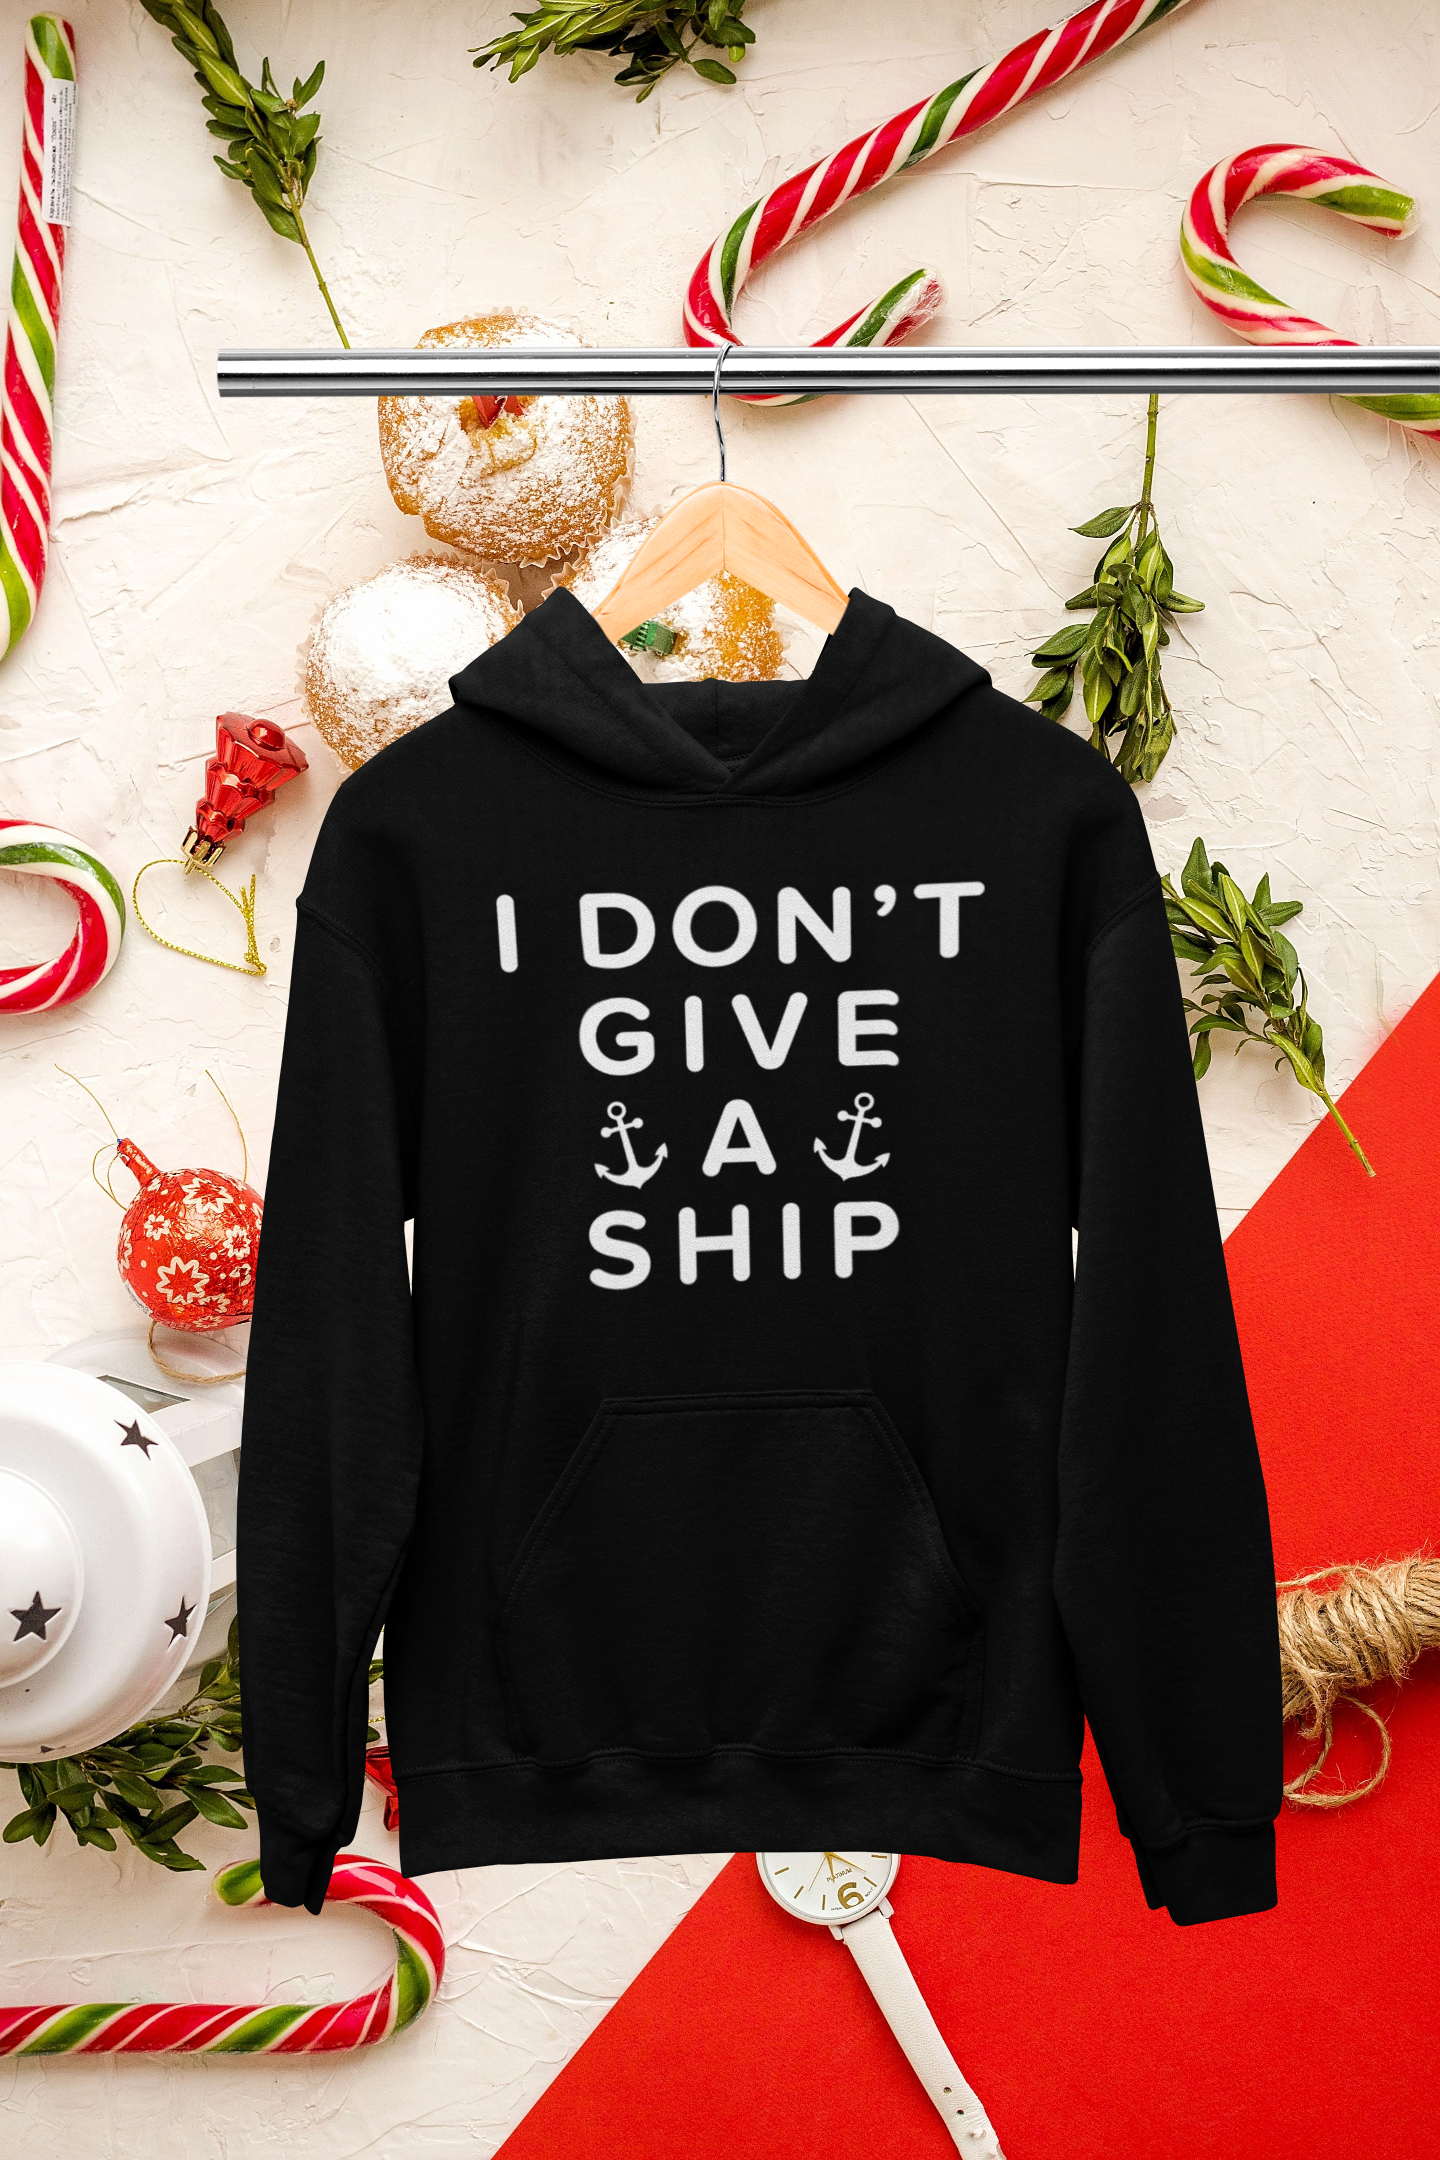 I don't give a ship Hoodie